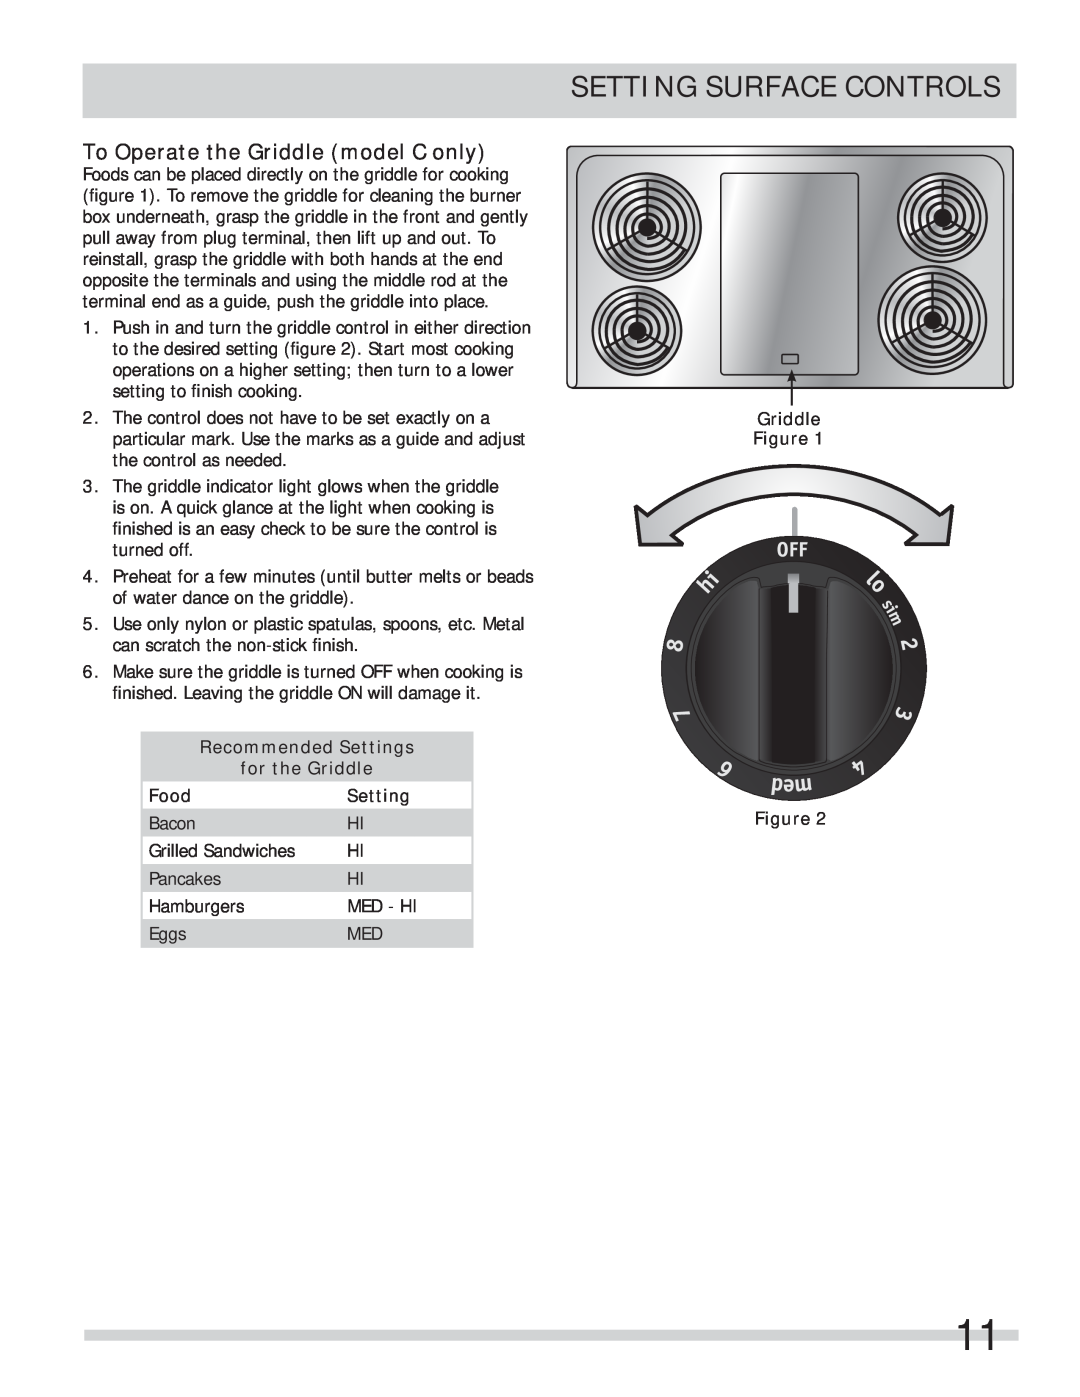 Frigidaire FFEF4015LW To Operate the Griddle model C only, Setting Surface Controls, Recommended Settings for the Griddle 